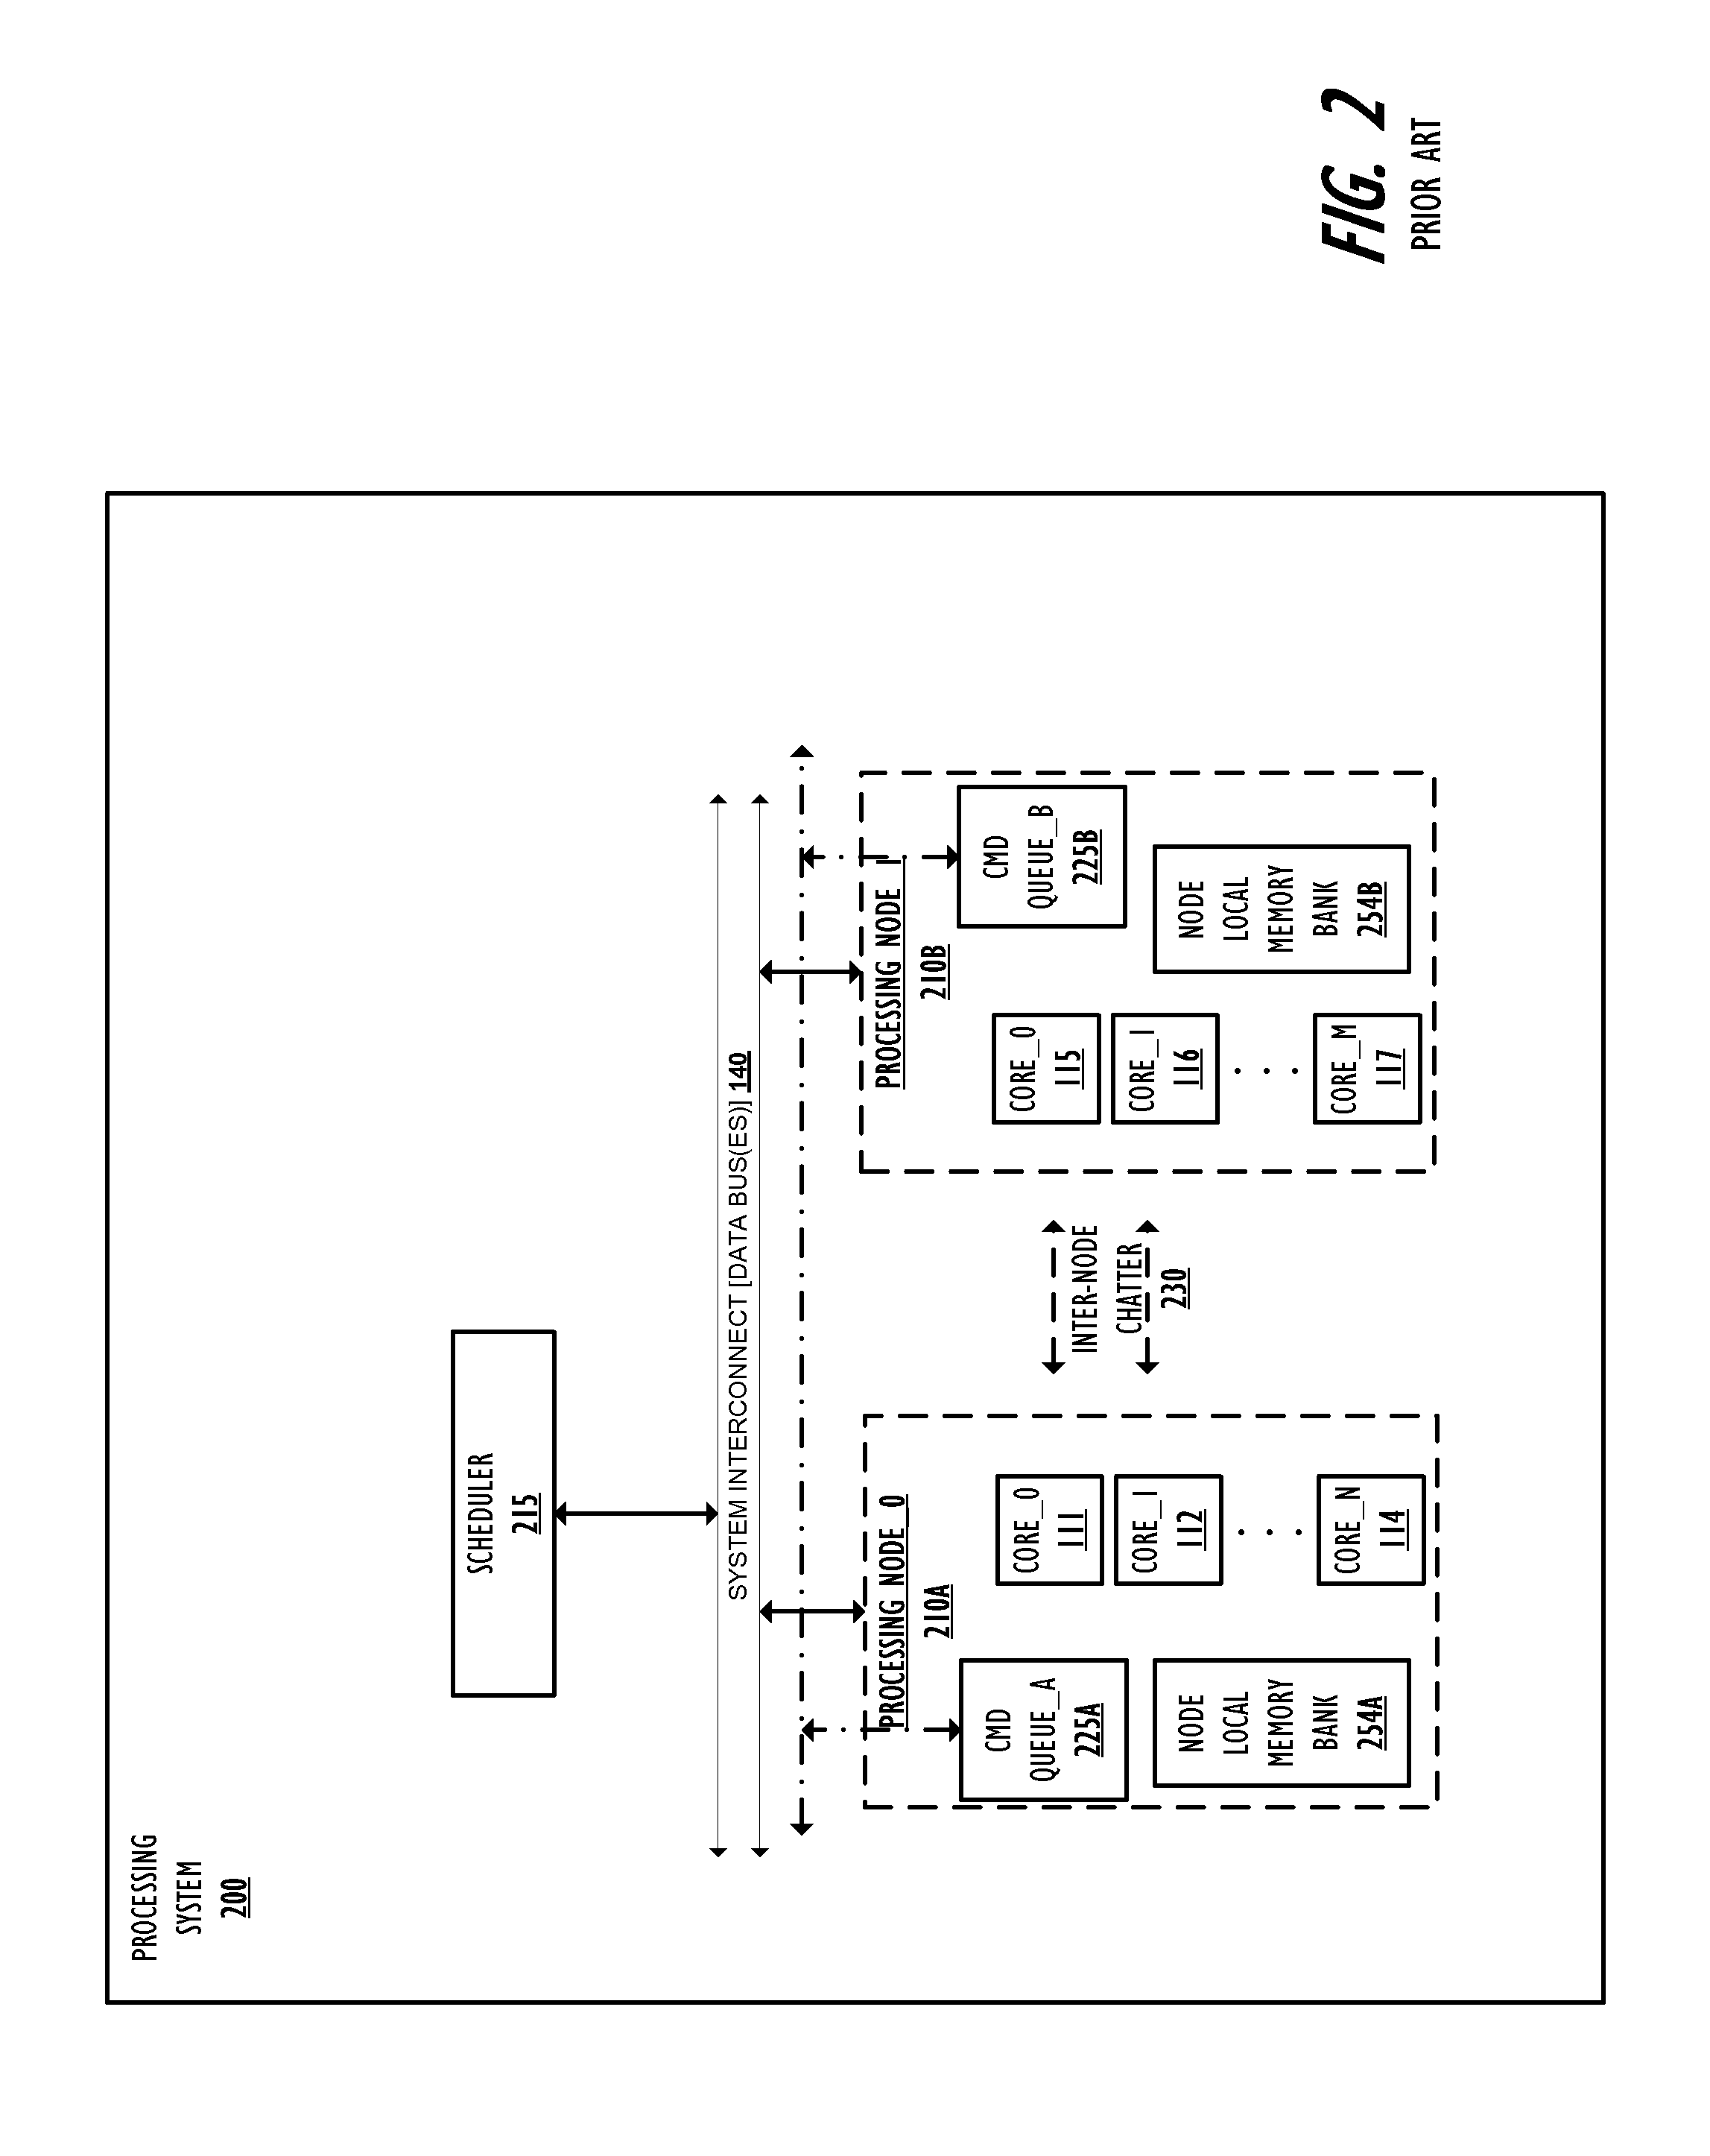 System for reducing data transfer latency to a global queue by generating bit mask to identify selected processing nodes/units in multi-node data processing system